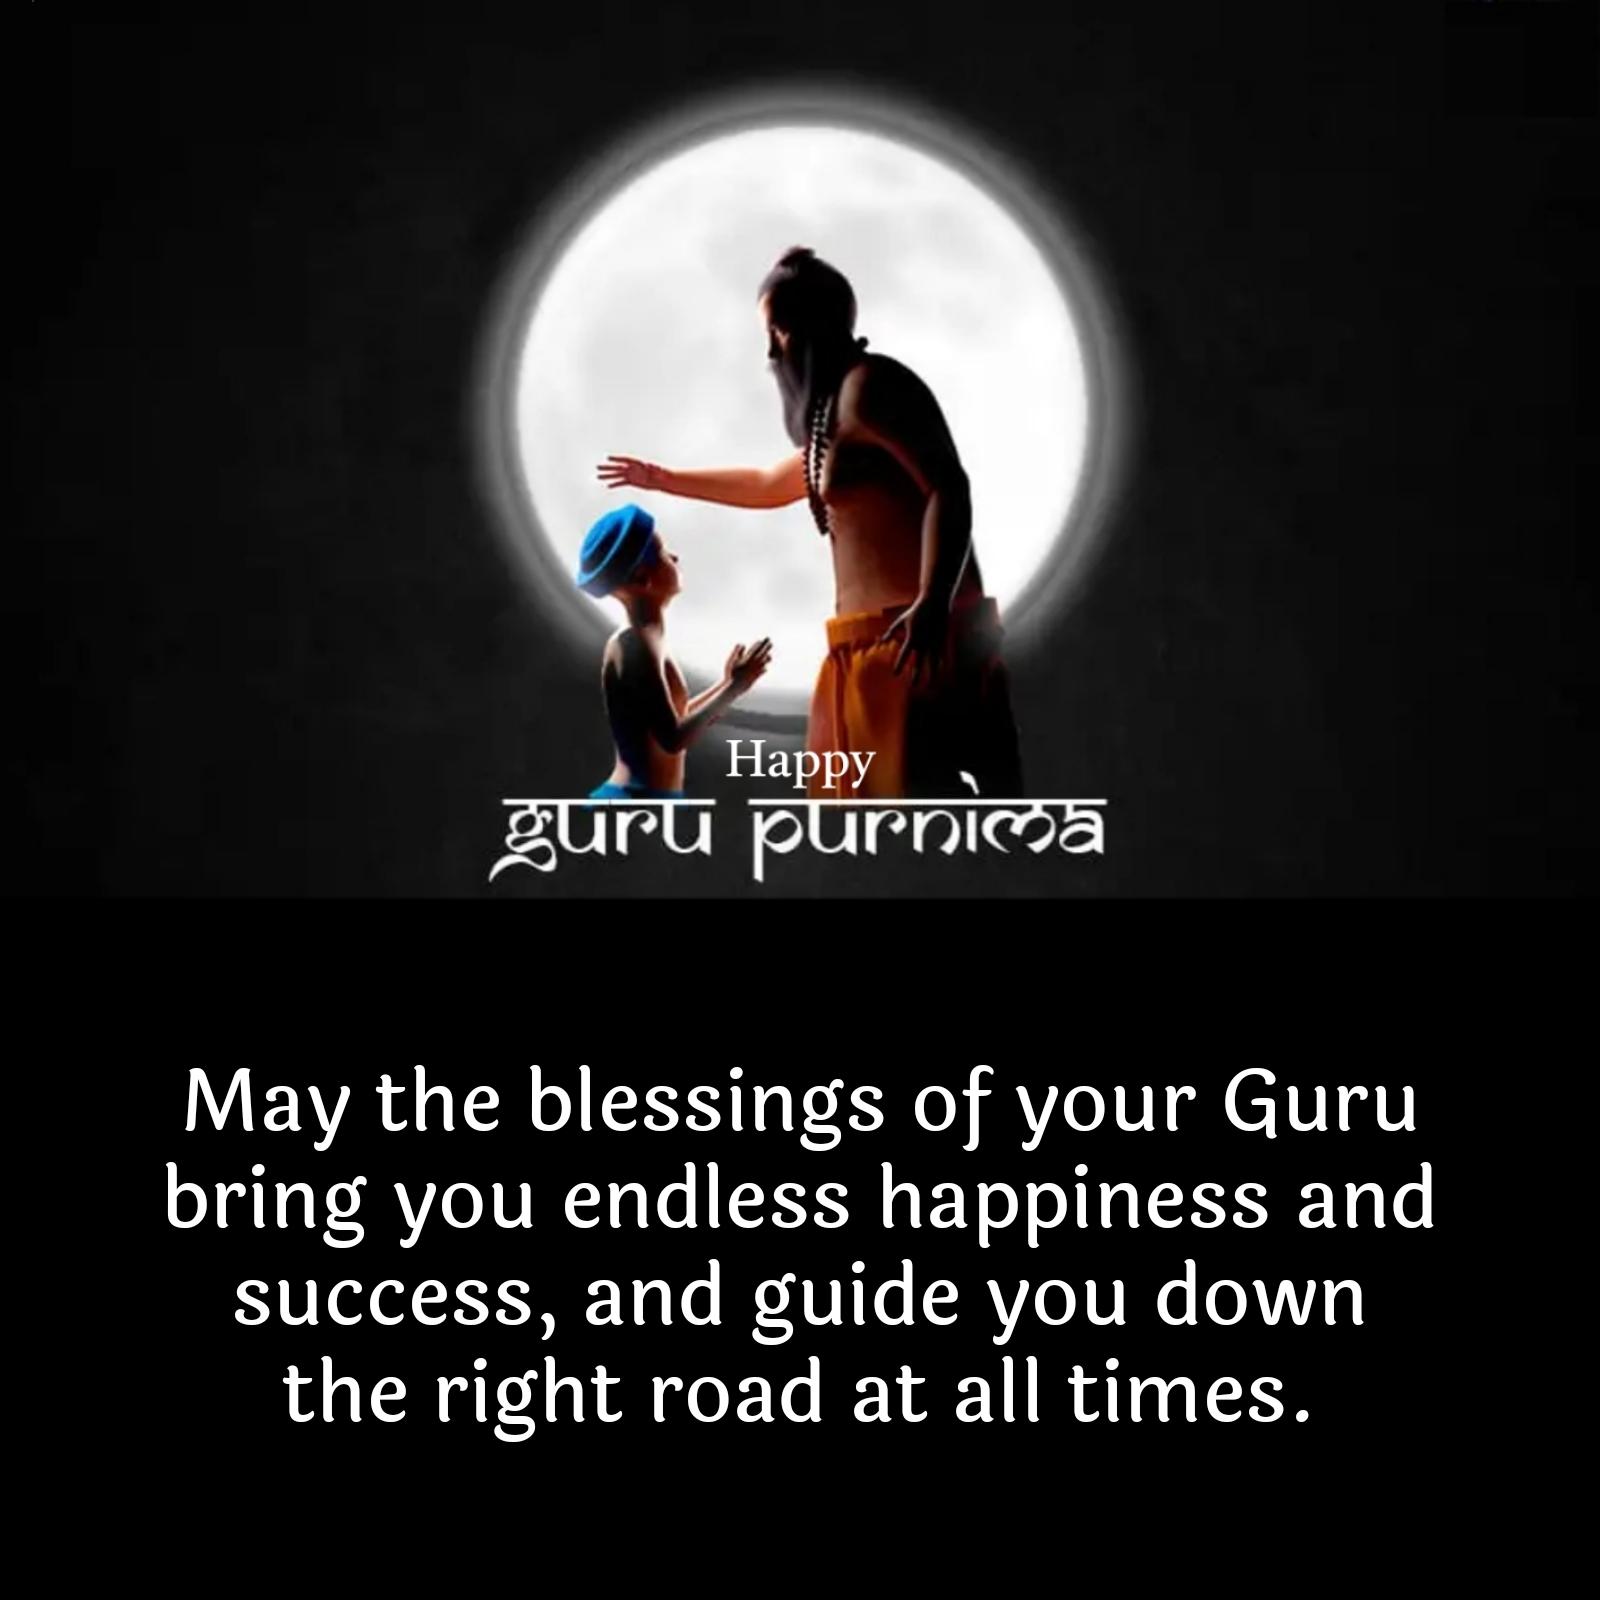 May the blessings of your Guru bring you endless happiness and success